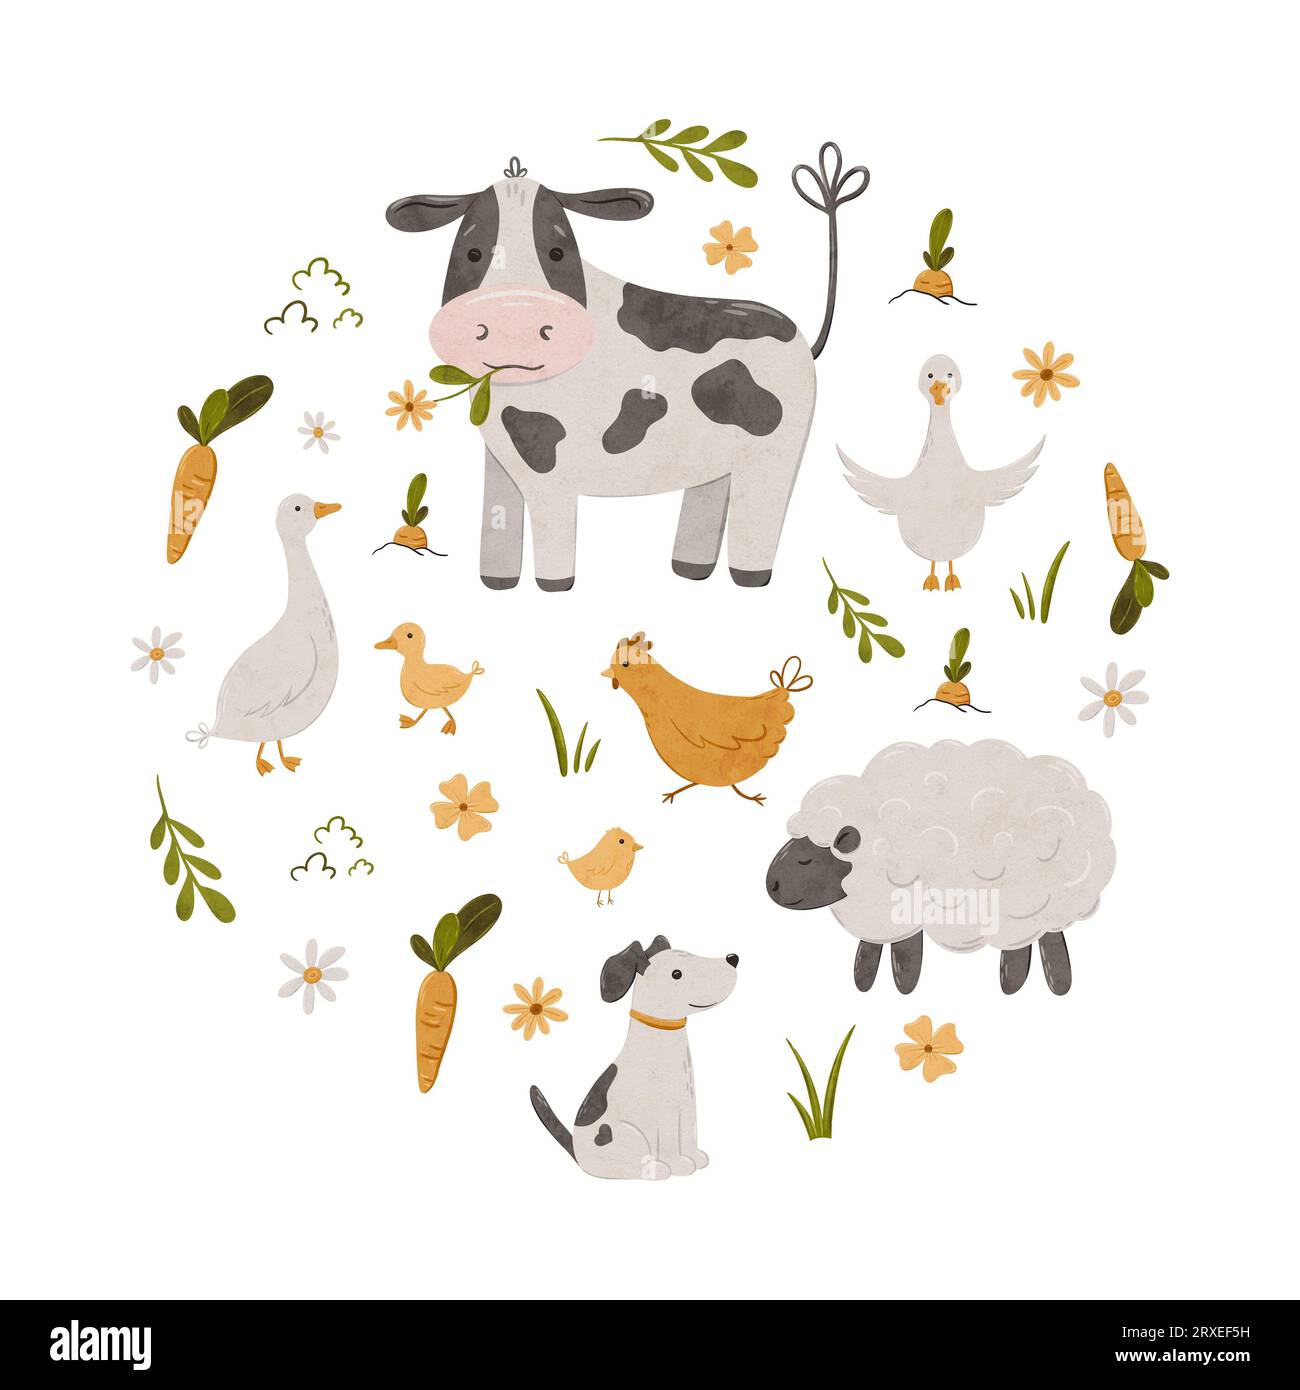 Cute farm animals cow, lamb, chick, dog, cow, sheep, chicken and goose. Domestic animals kid set in round composition hand drawn illustration. Rural Stock Photo